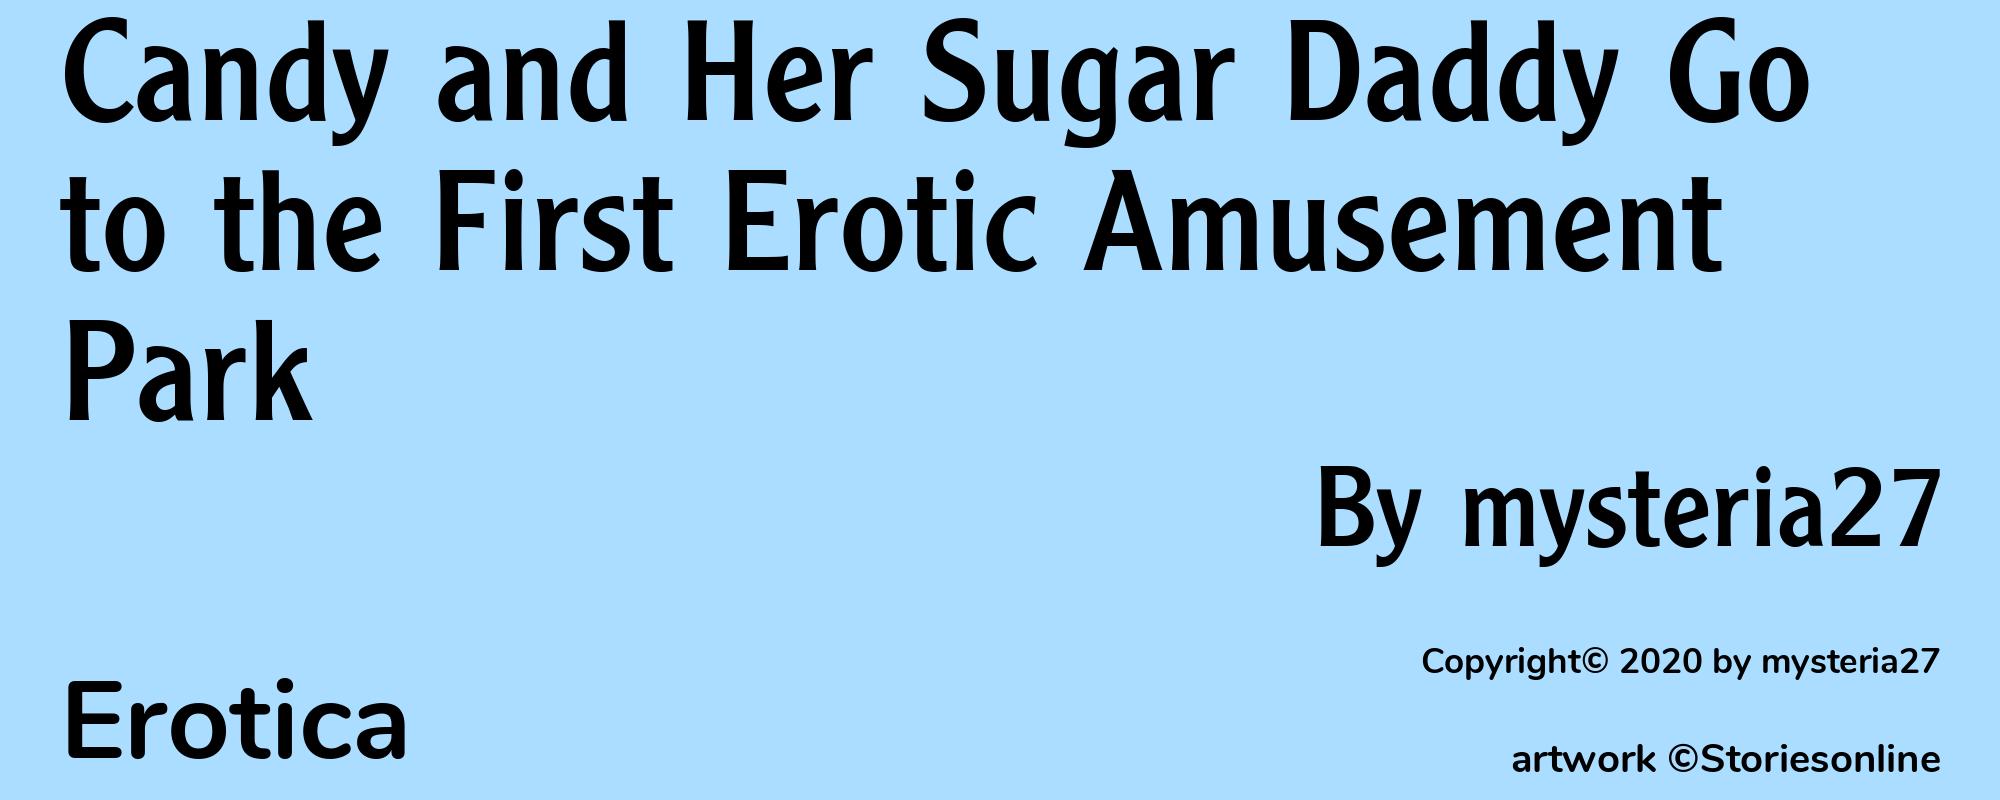 Candy and Her Sugar Daddy Go to the First Erotic Amusement Park - Cover